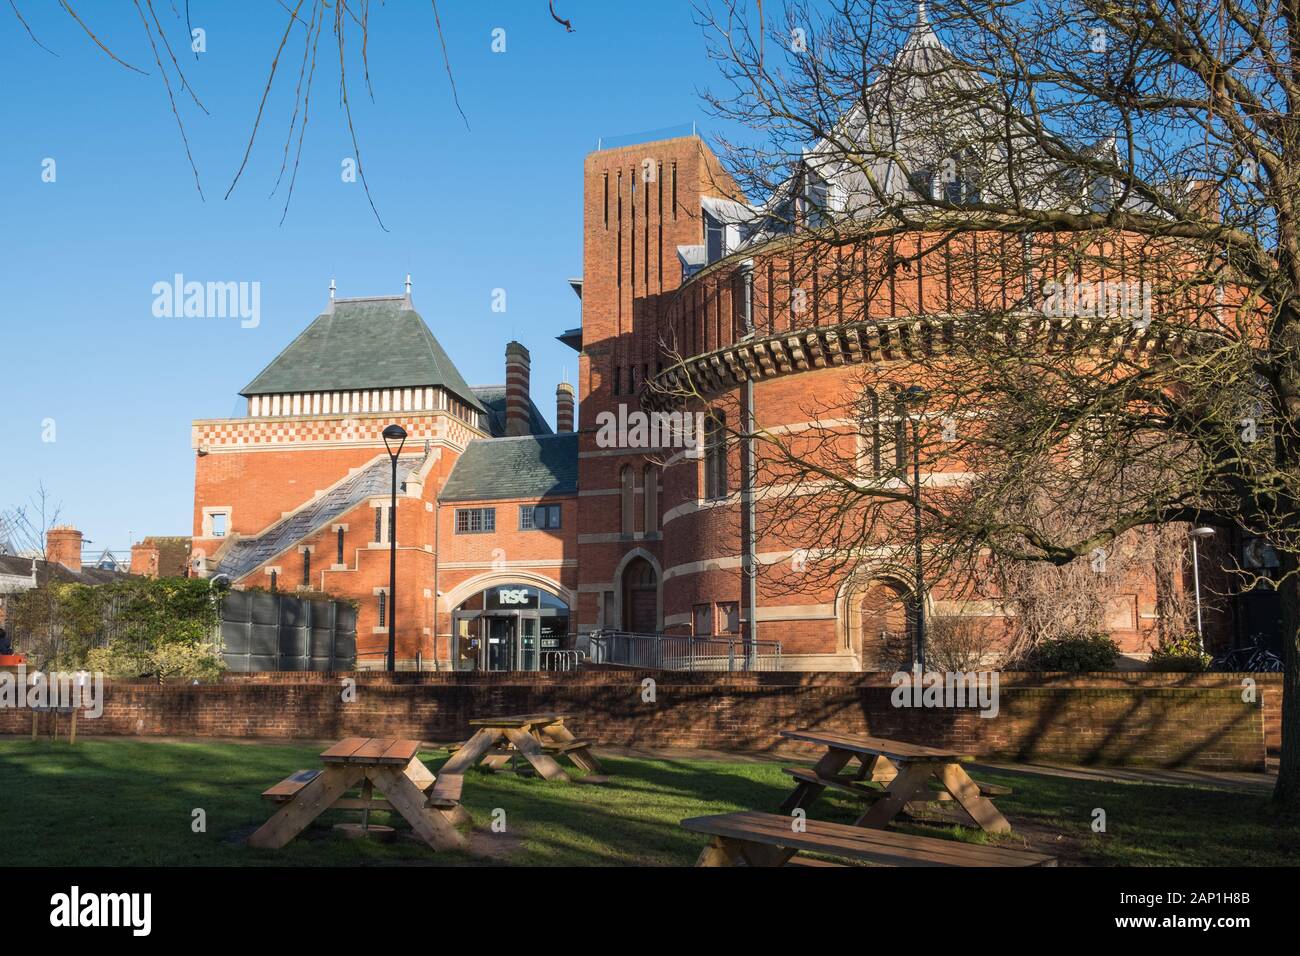 The Royal Shakespeare Theatre on the bank of the River Avon on Stratford-upon-Avon, Warwickshire, UK Stock Photo